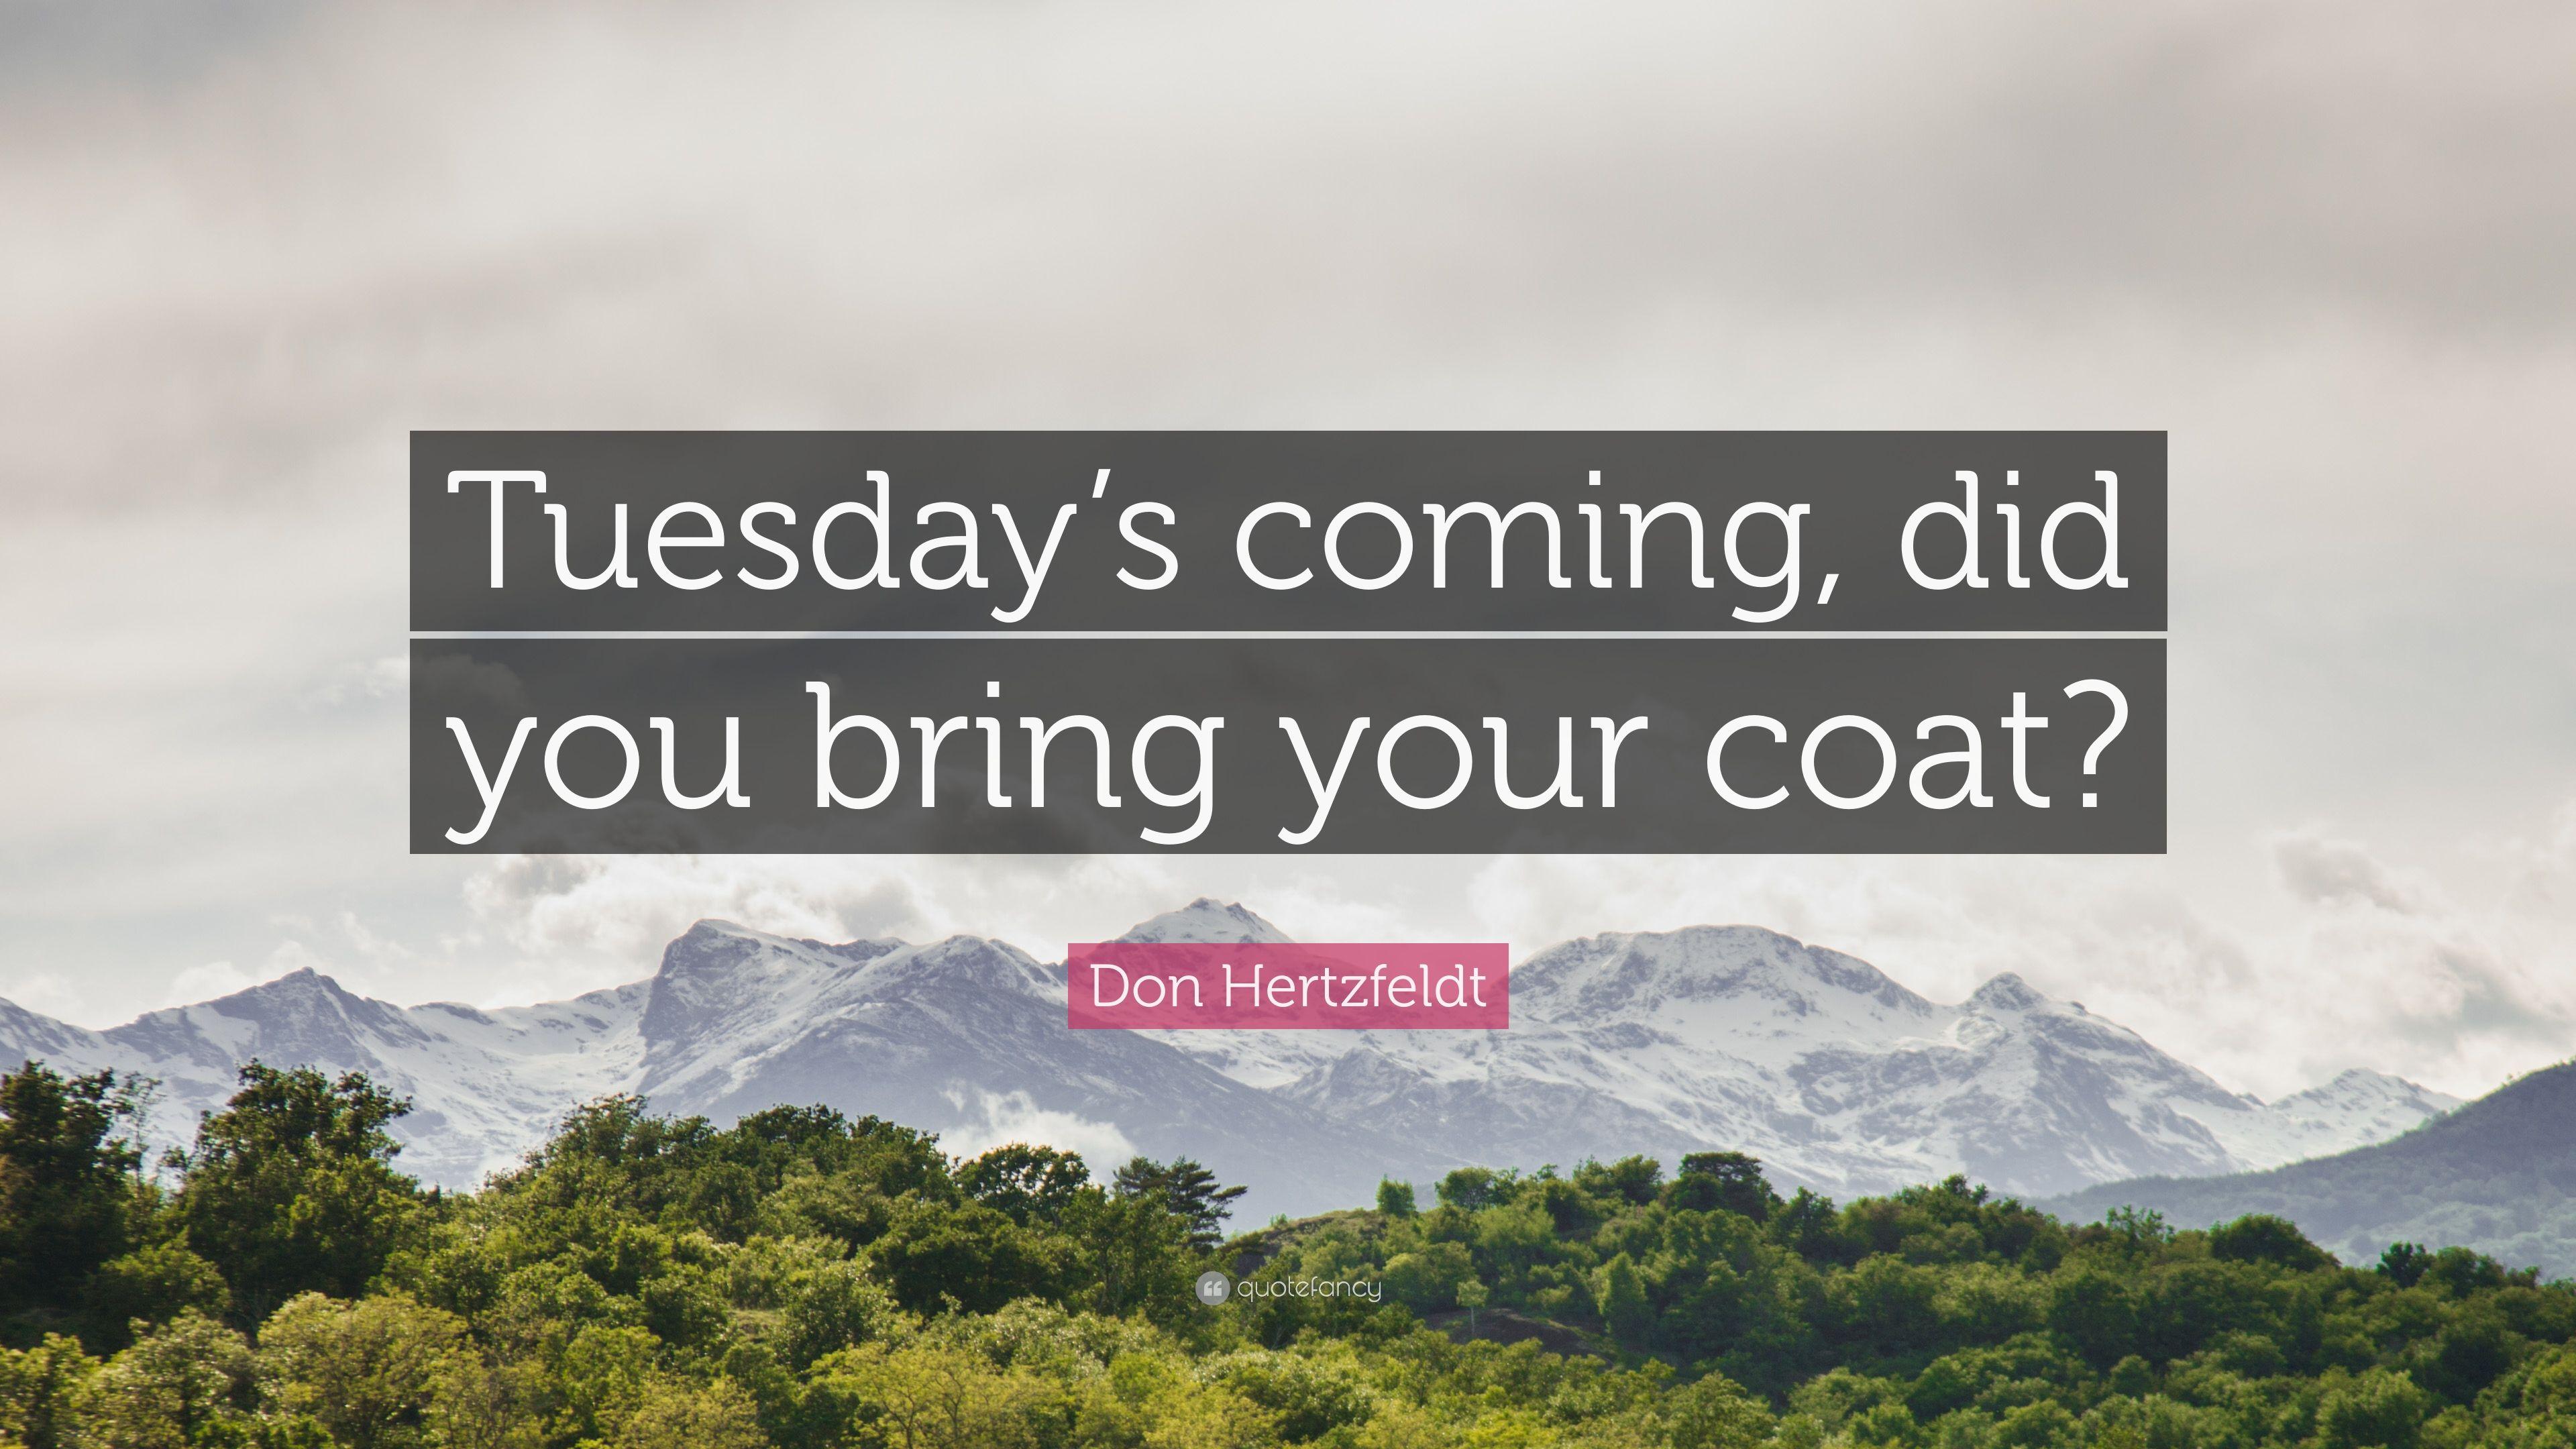 Don Hertzfeldt Quote: “Tuesday's coming, did you bring your coat